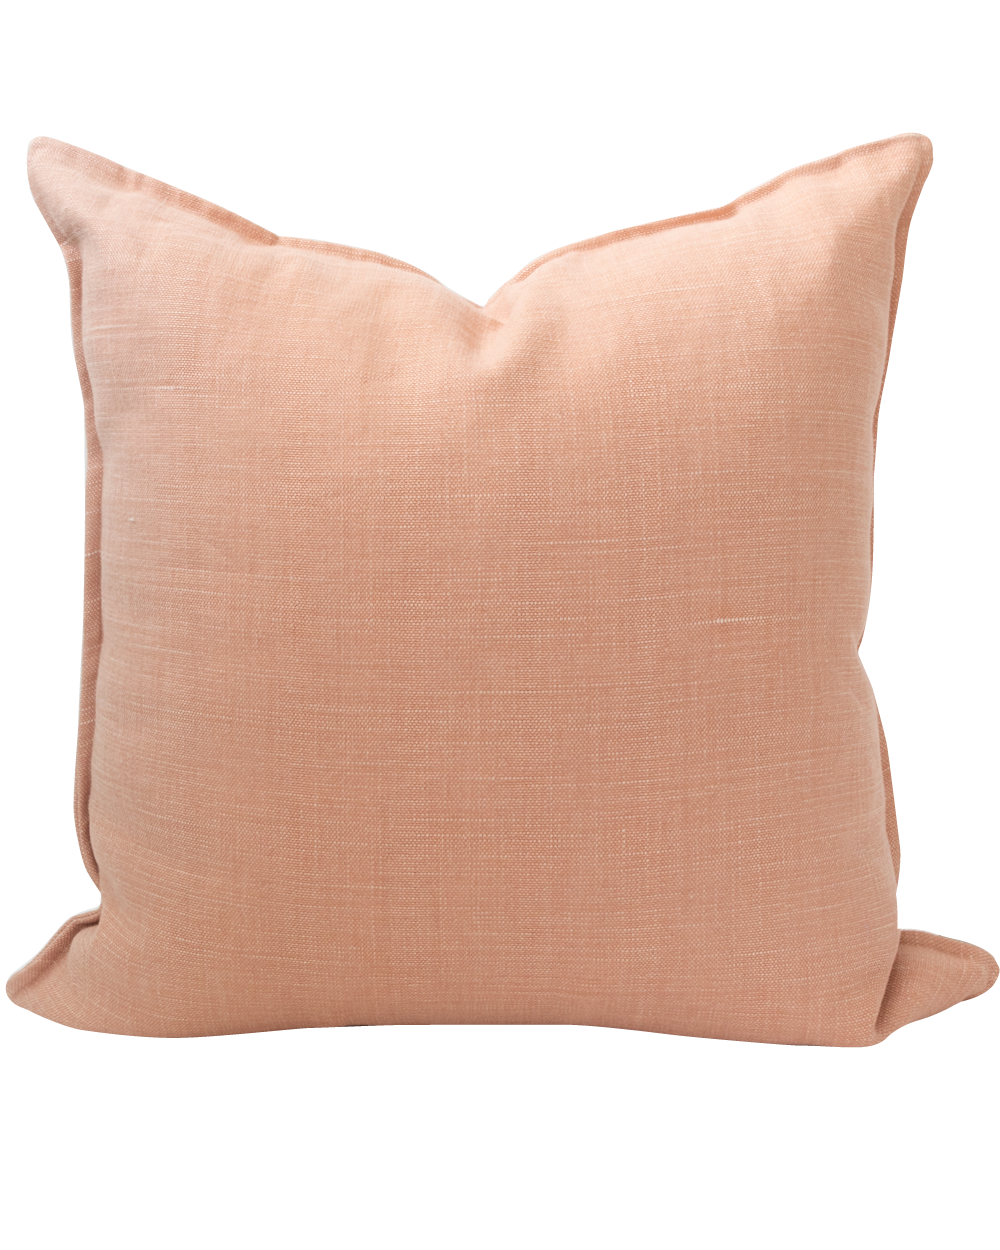 Chloe Pillow Cover, Warm Pink